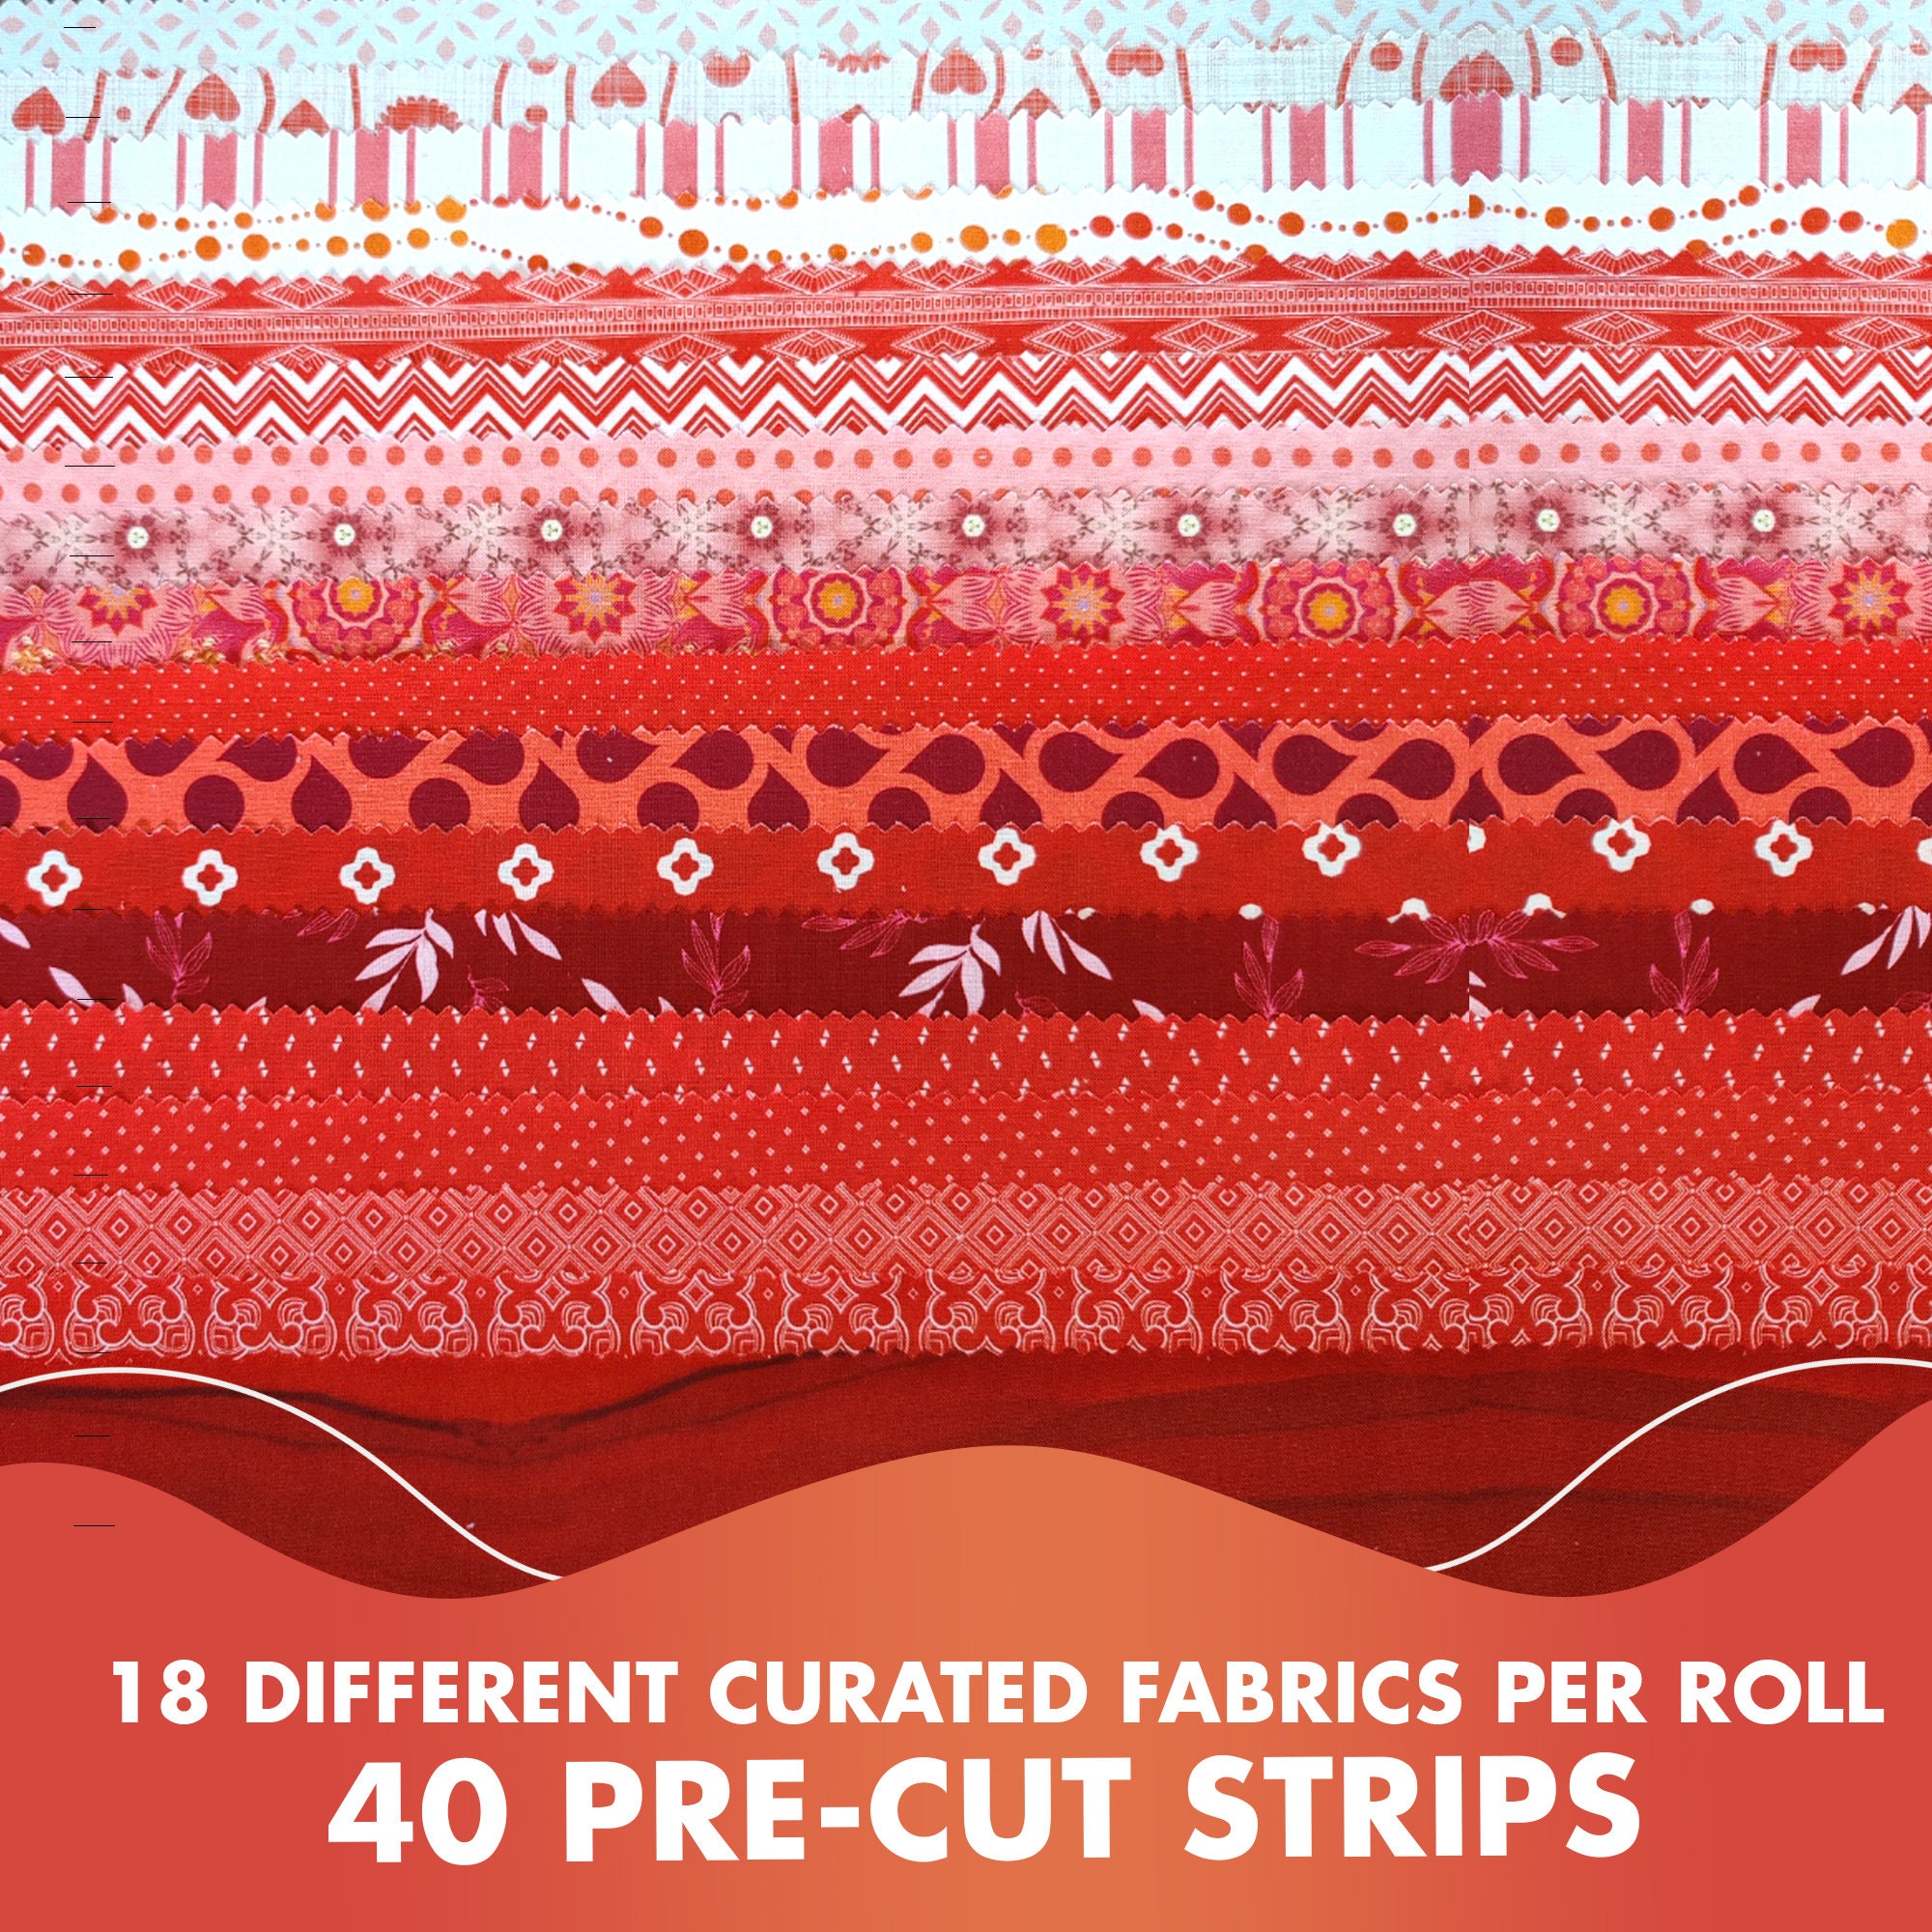 Needles Quilt Studio - (Beach House) 40 Strip Jelly Roll Fabric 2.5 x 44  | Cotton Strips Bundles - Jelly Rolls for Quilting Assortment Fabrics